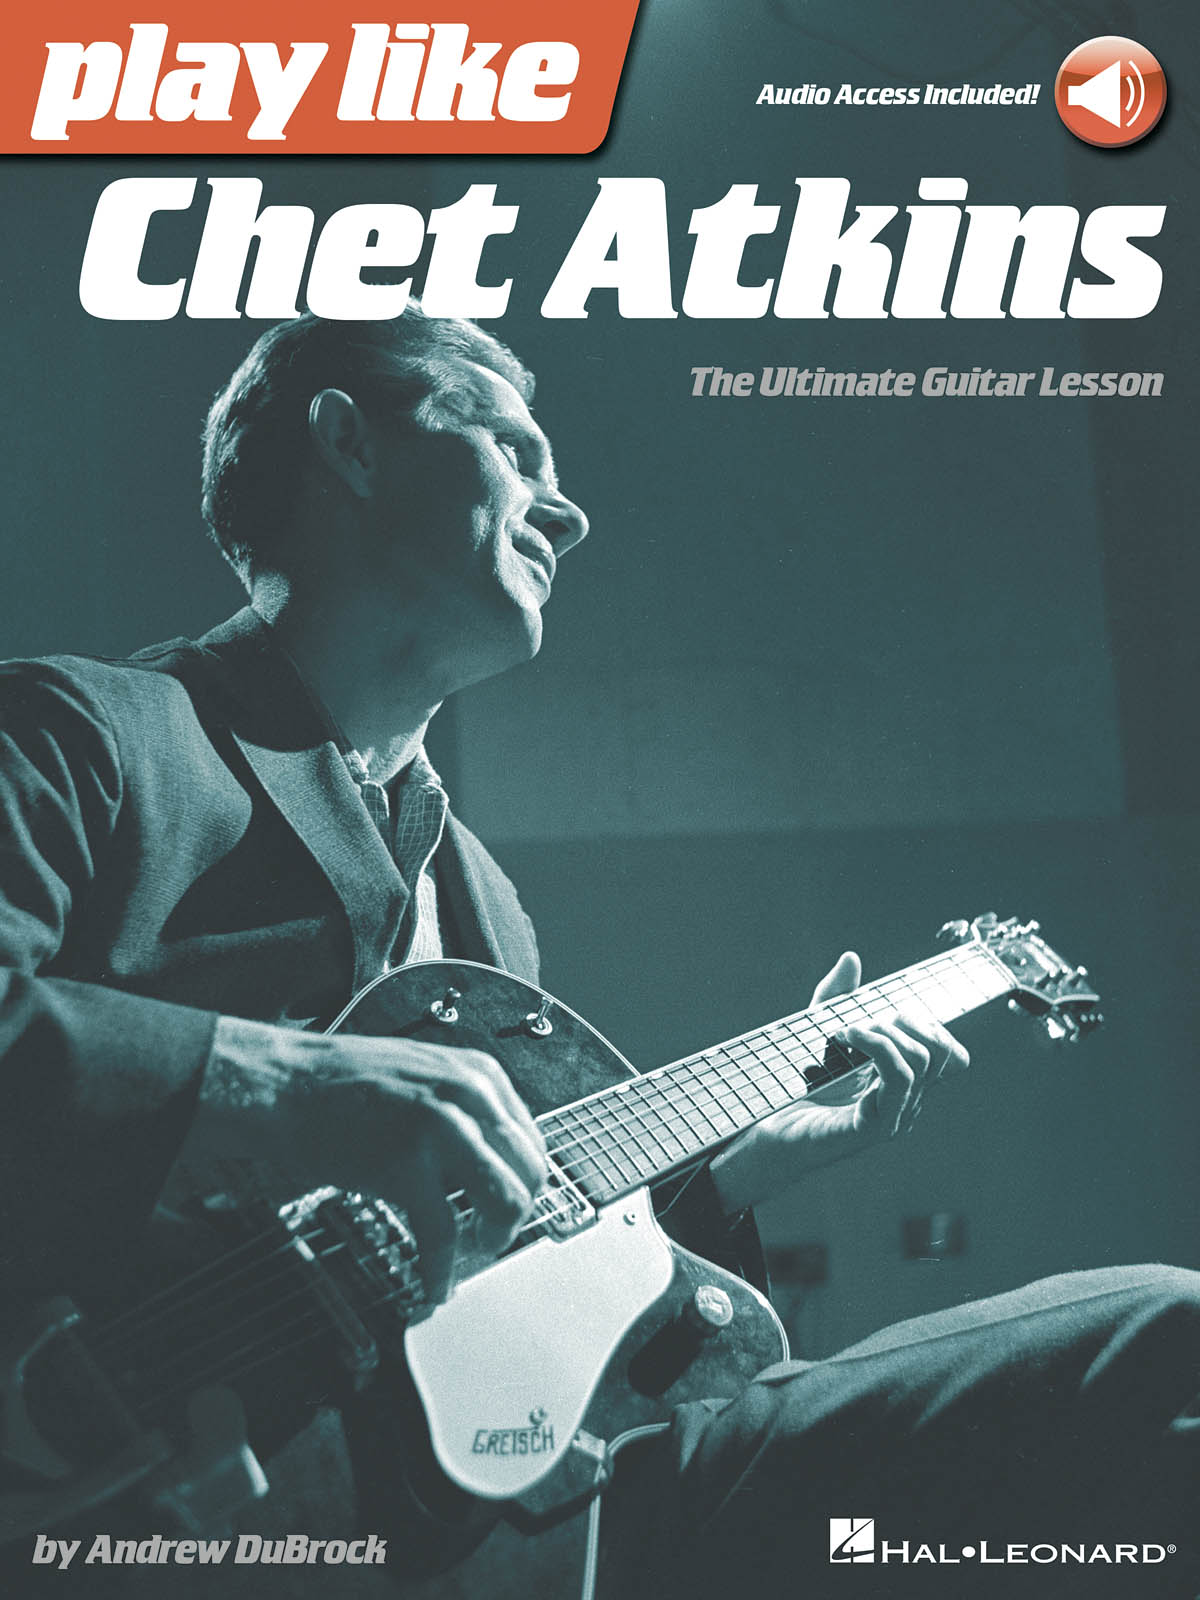 Play like Chet Atkins - The Ultimate Guitar Lesson Book  - noty na kytaru